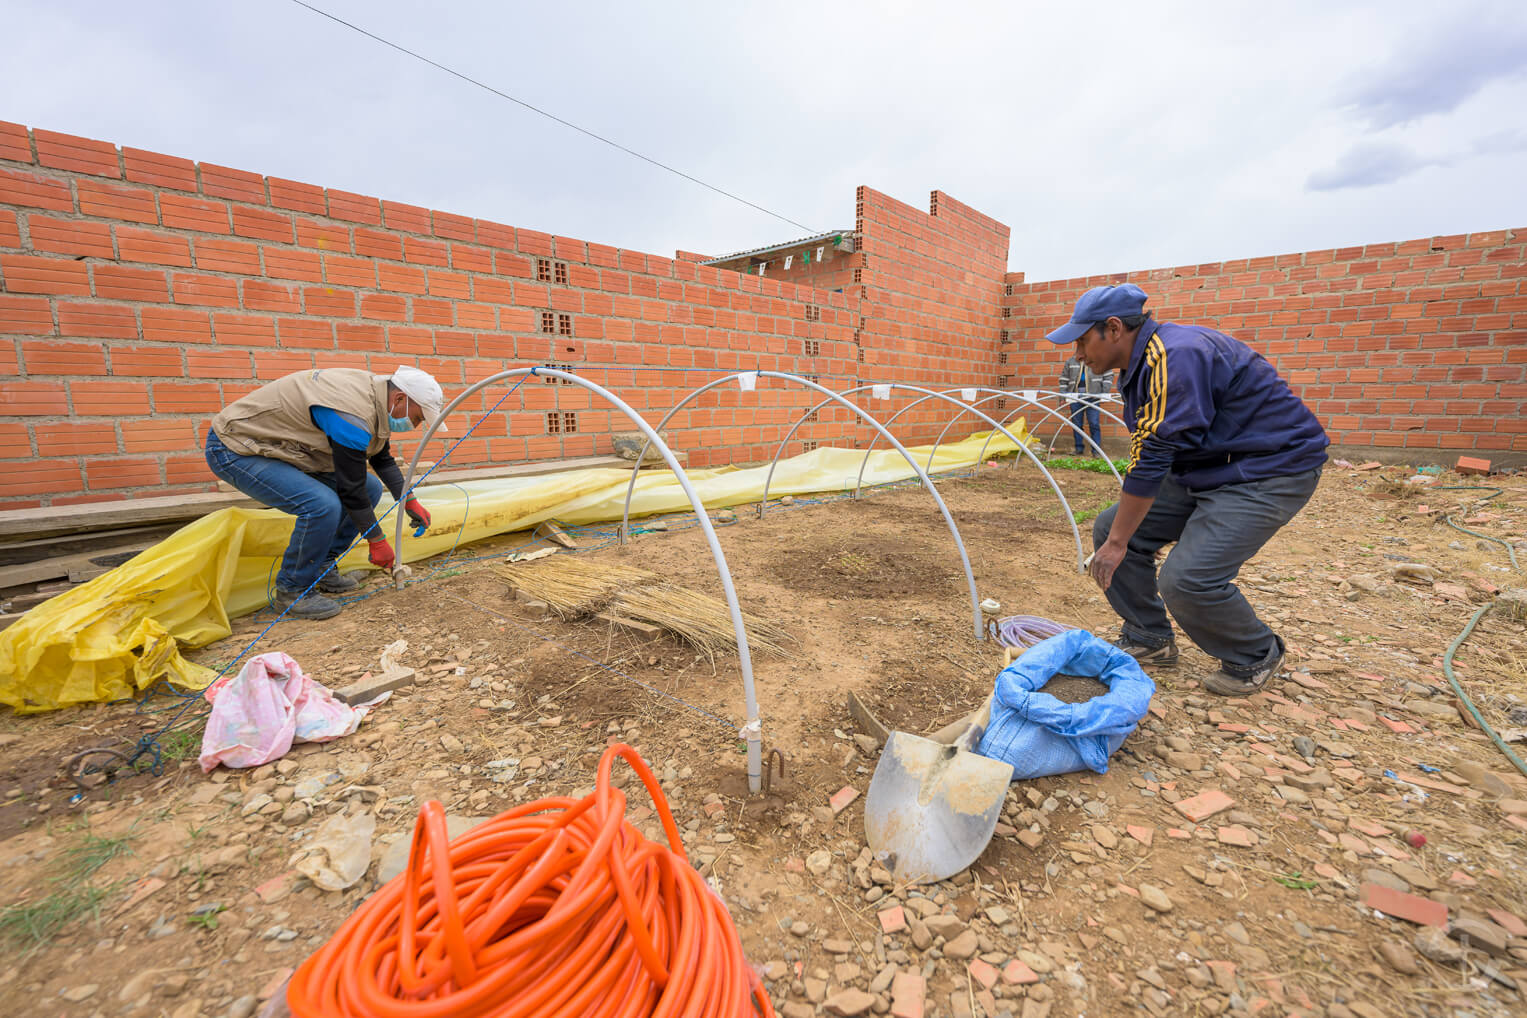 Franz, an El Alto residents, helps our staff construct micro tunnels for others in the city hoping to plant gardens.